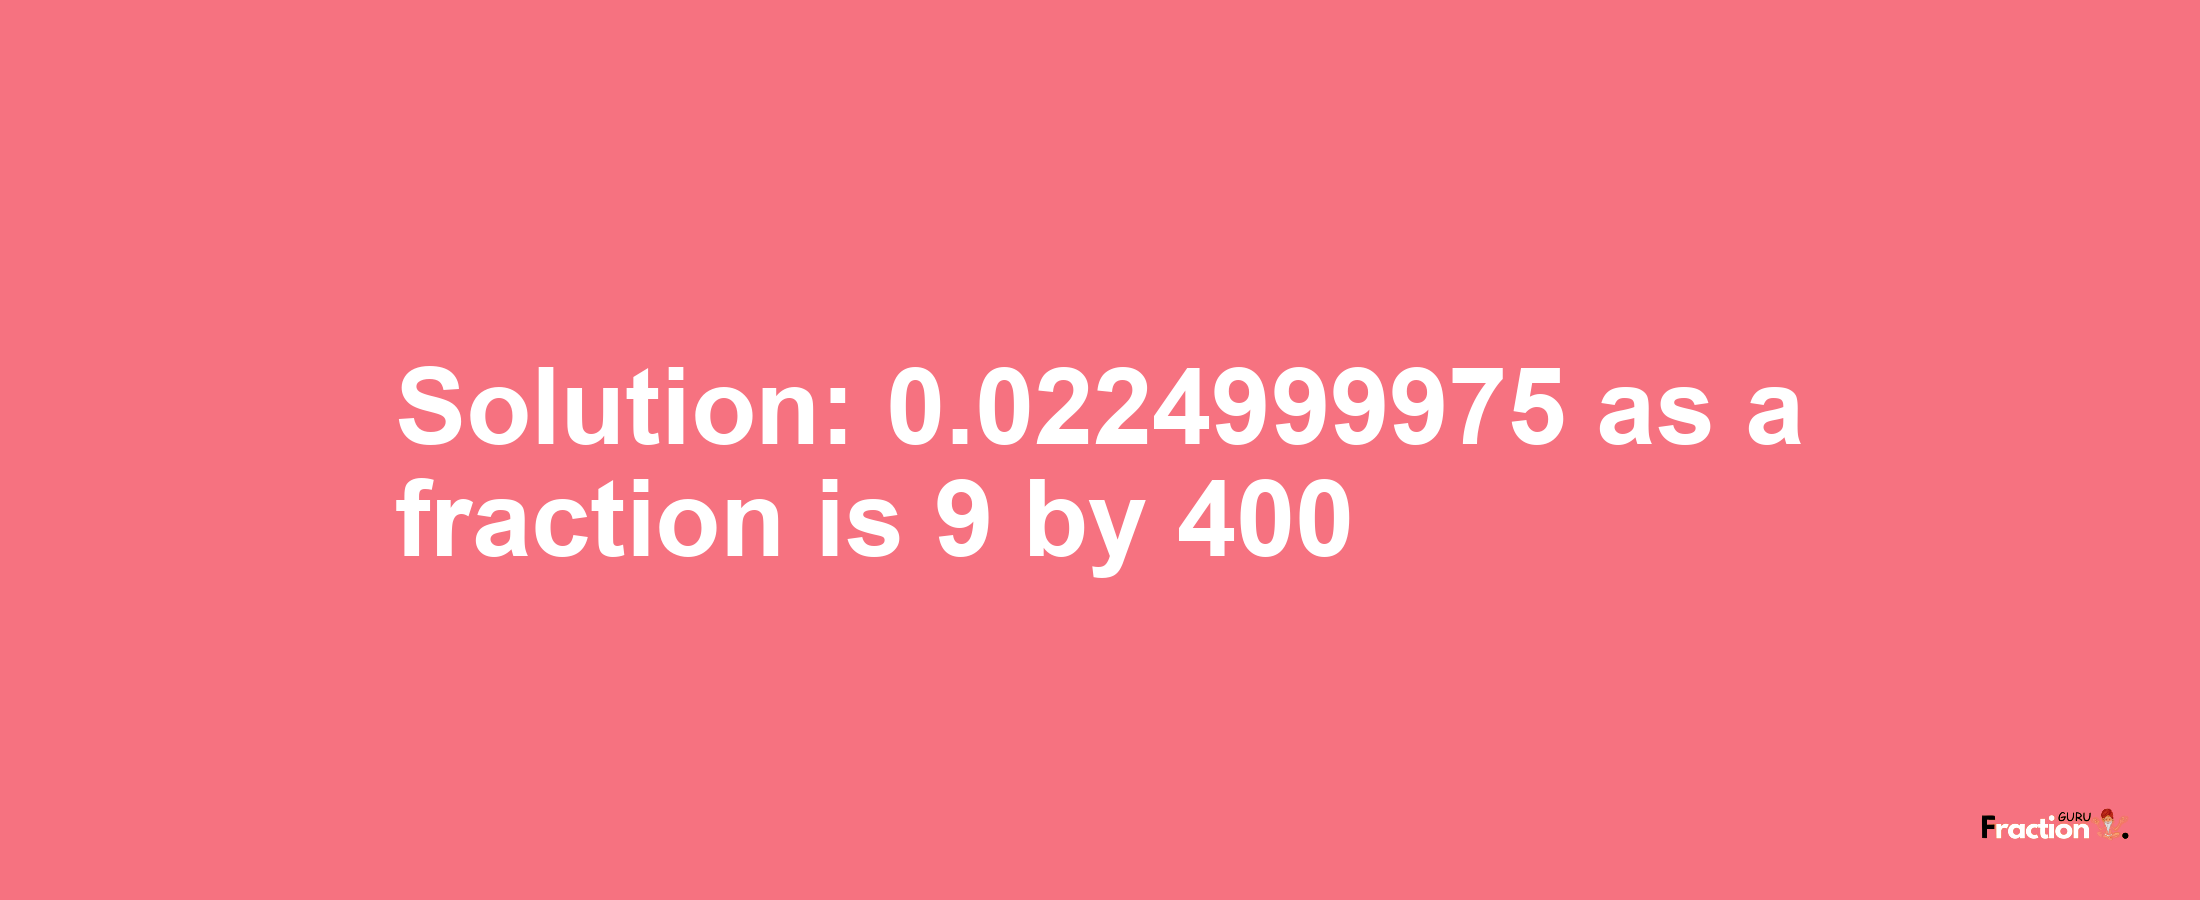 Solution:0.0224999975 as a fraction is 9/400